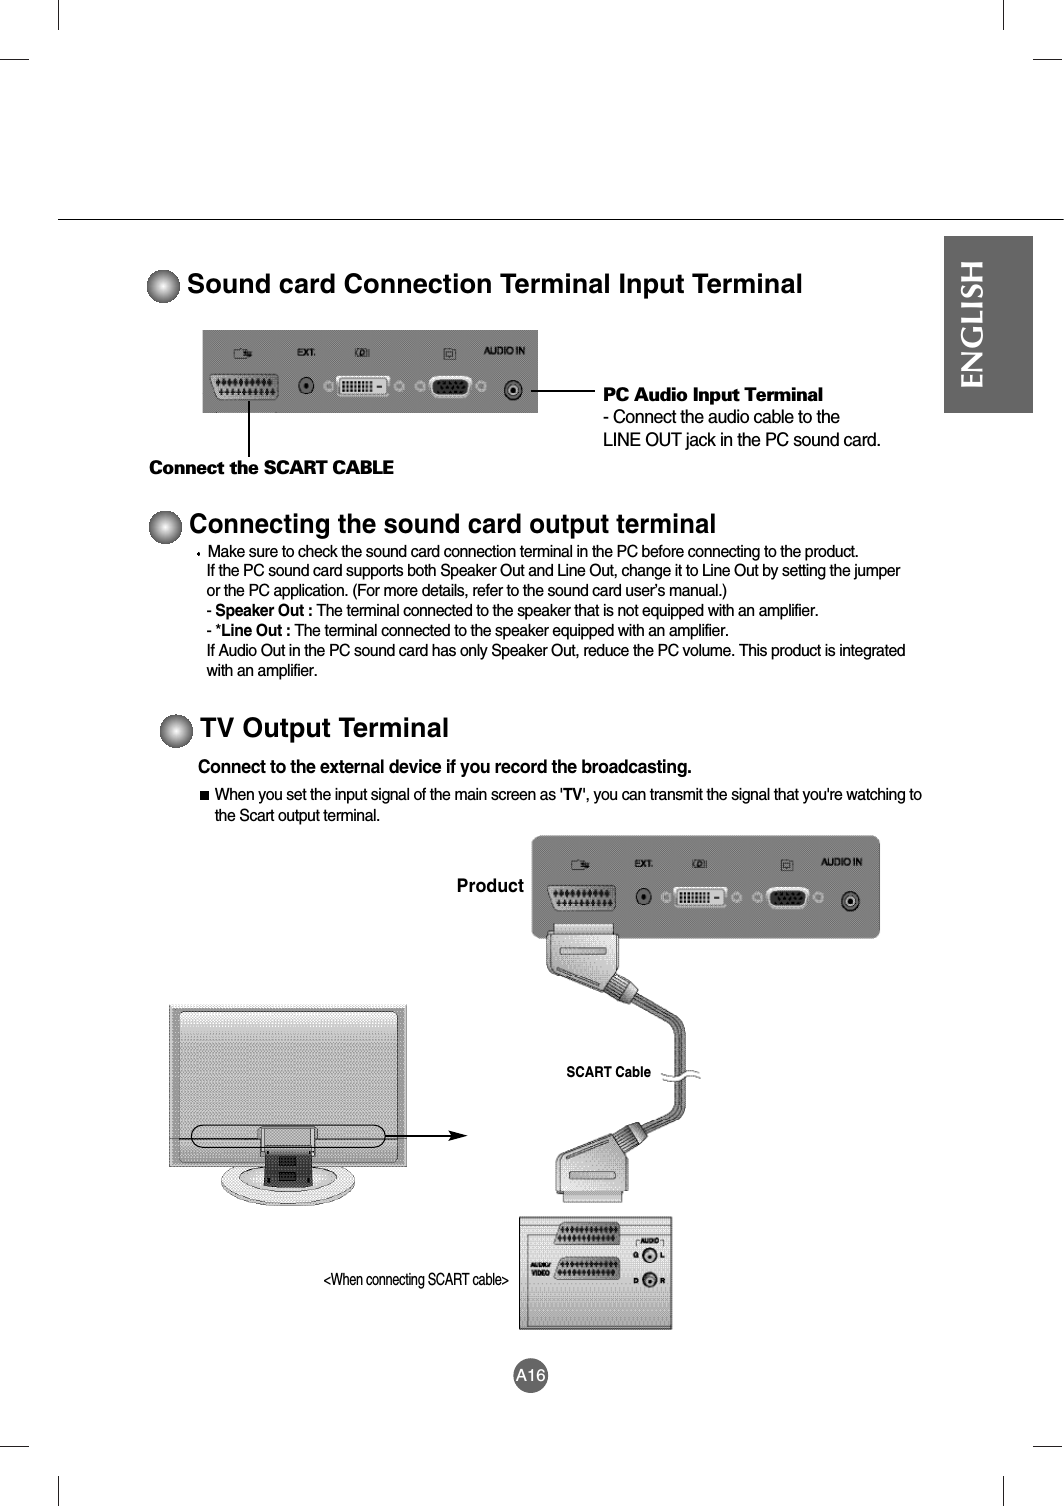 A16ENGLISHSound card Connection Terminal Input TerminalPC Audio Input Terminal- Connect the audio cable to the LINE OUT jack in the PC sound card.Connect the SCART CABLEMake sure to check the sound card connection terminal in the PC before connecting to the product.If the PC sound card supports both Speaker Out and Line Out, change it to Line Out by setting the jumperor the PC application. (For more details, refer to the sound card user’s manual.)- Speaker Out : The terminal connected to the speaker that is not equipped with an amplifier.- *Line Out : The terminal connected to the speaker equipped with an amplifier.If Audio Out in the PC sound card has only Speaker Out, reduce the PC volume. This product is integratedwith an amplifier.Connecting the sound card output terminalConnect to the external device if you record the broadcasting.When you set the input signal of the main screen as &apos;TV&apos;, you can transmit the signal that you&apos;re watching tothe Scart output terminal.TV Output TerminalSCART Cable&lt;When connecting SCART cable&gt;Product